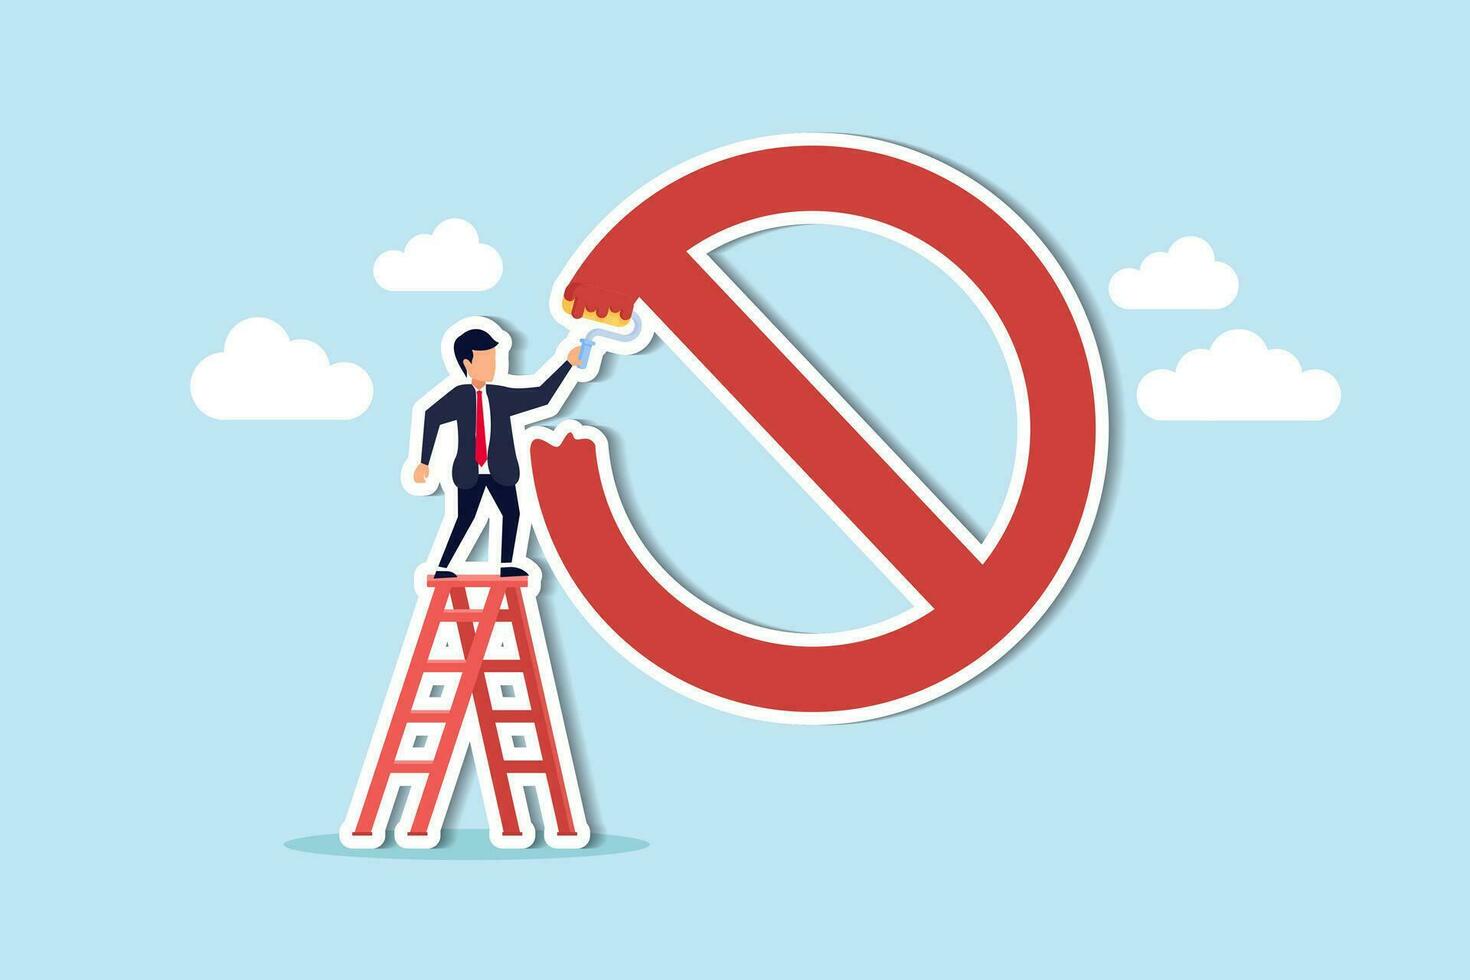 Prohibition or stop sign, forbidden, unlawful or not allow to do, attention and warning sign, banned or illegal concept, businessman climb up ladder to paint prohibition symbol on the wall. vector